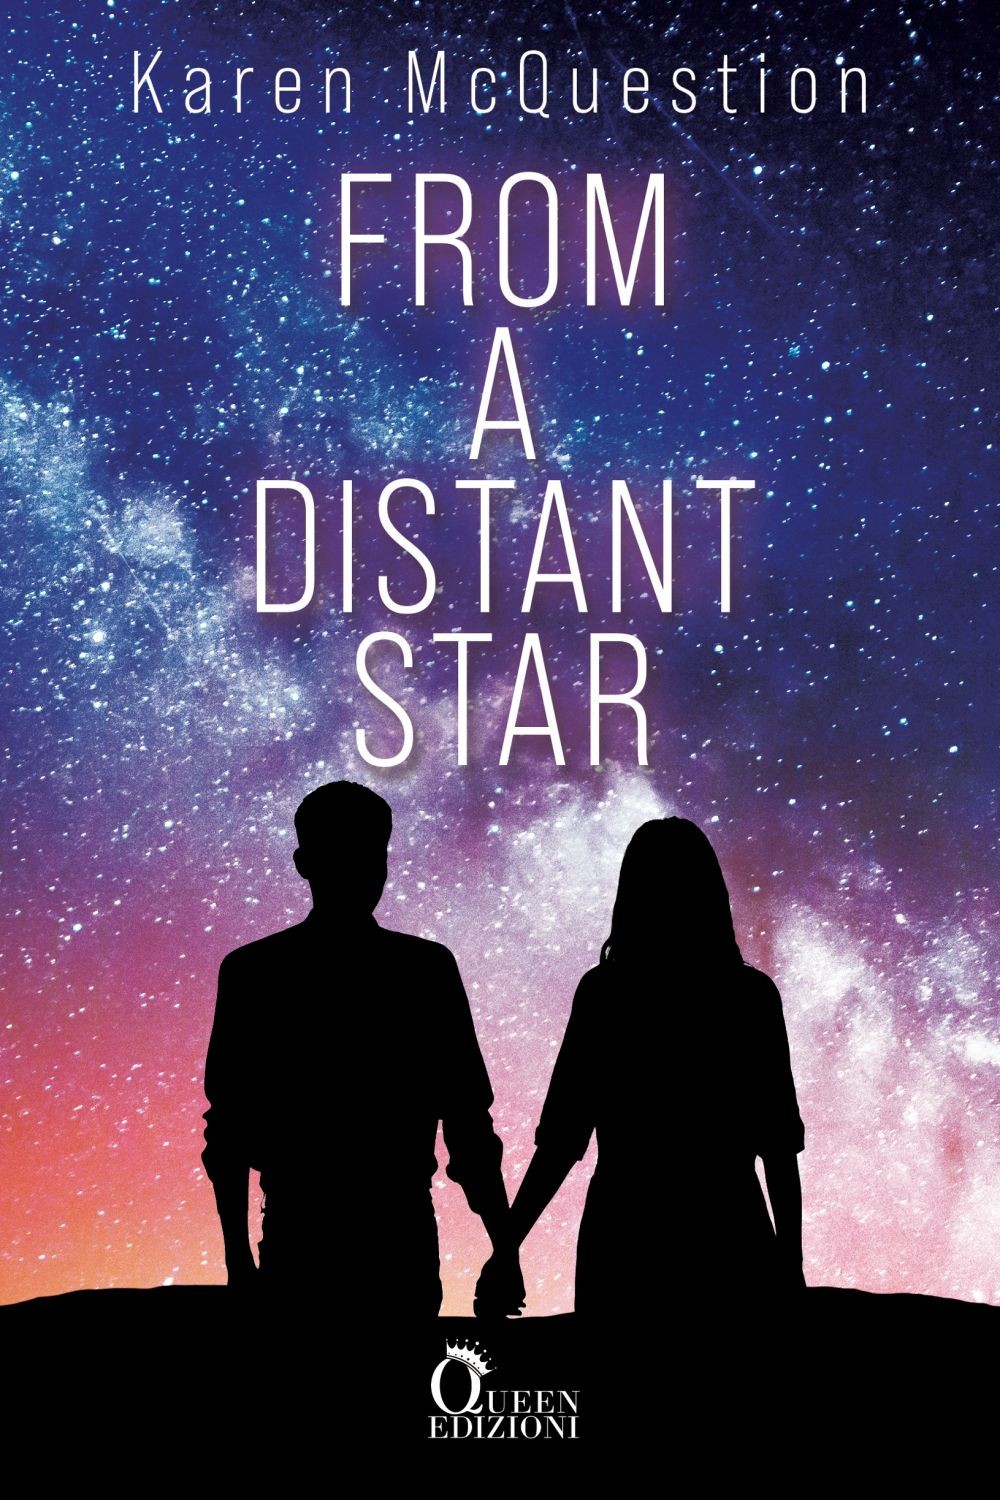 From a distant star - Librerie.coop